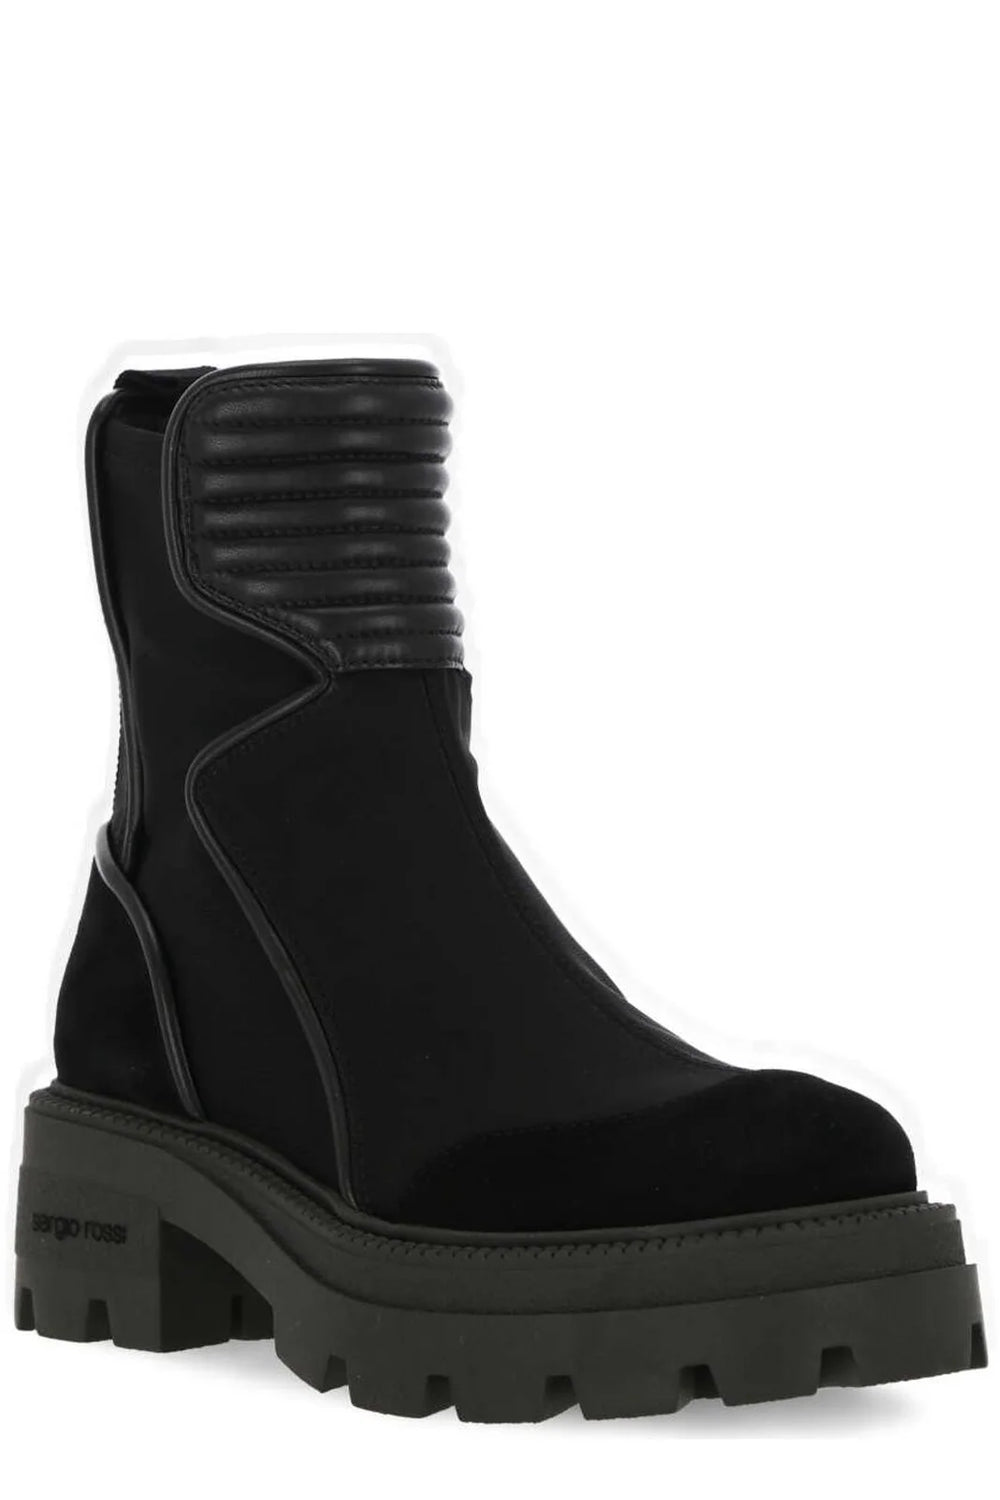 Sr Drive Slip-On Ankle Boots - Liberty Shoes Australia - Liberty Shoes Australia